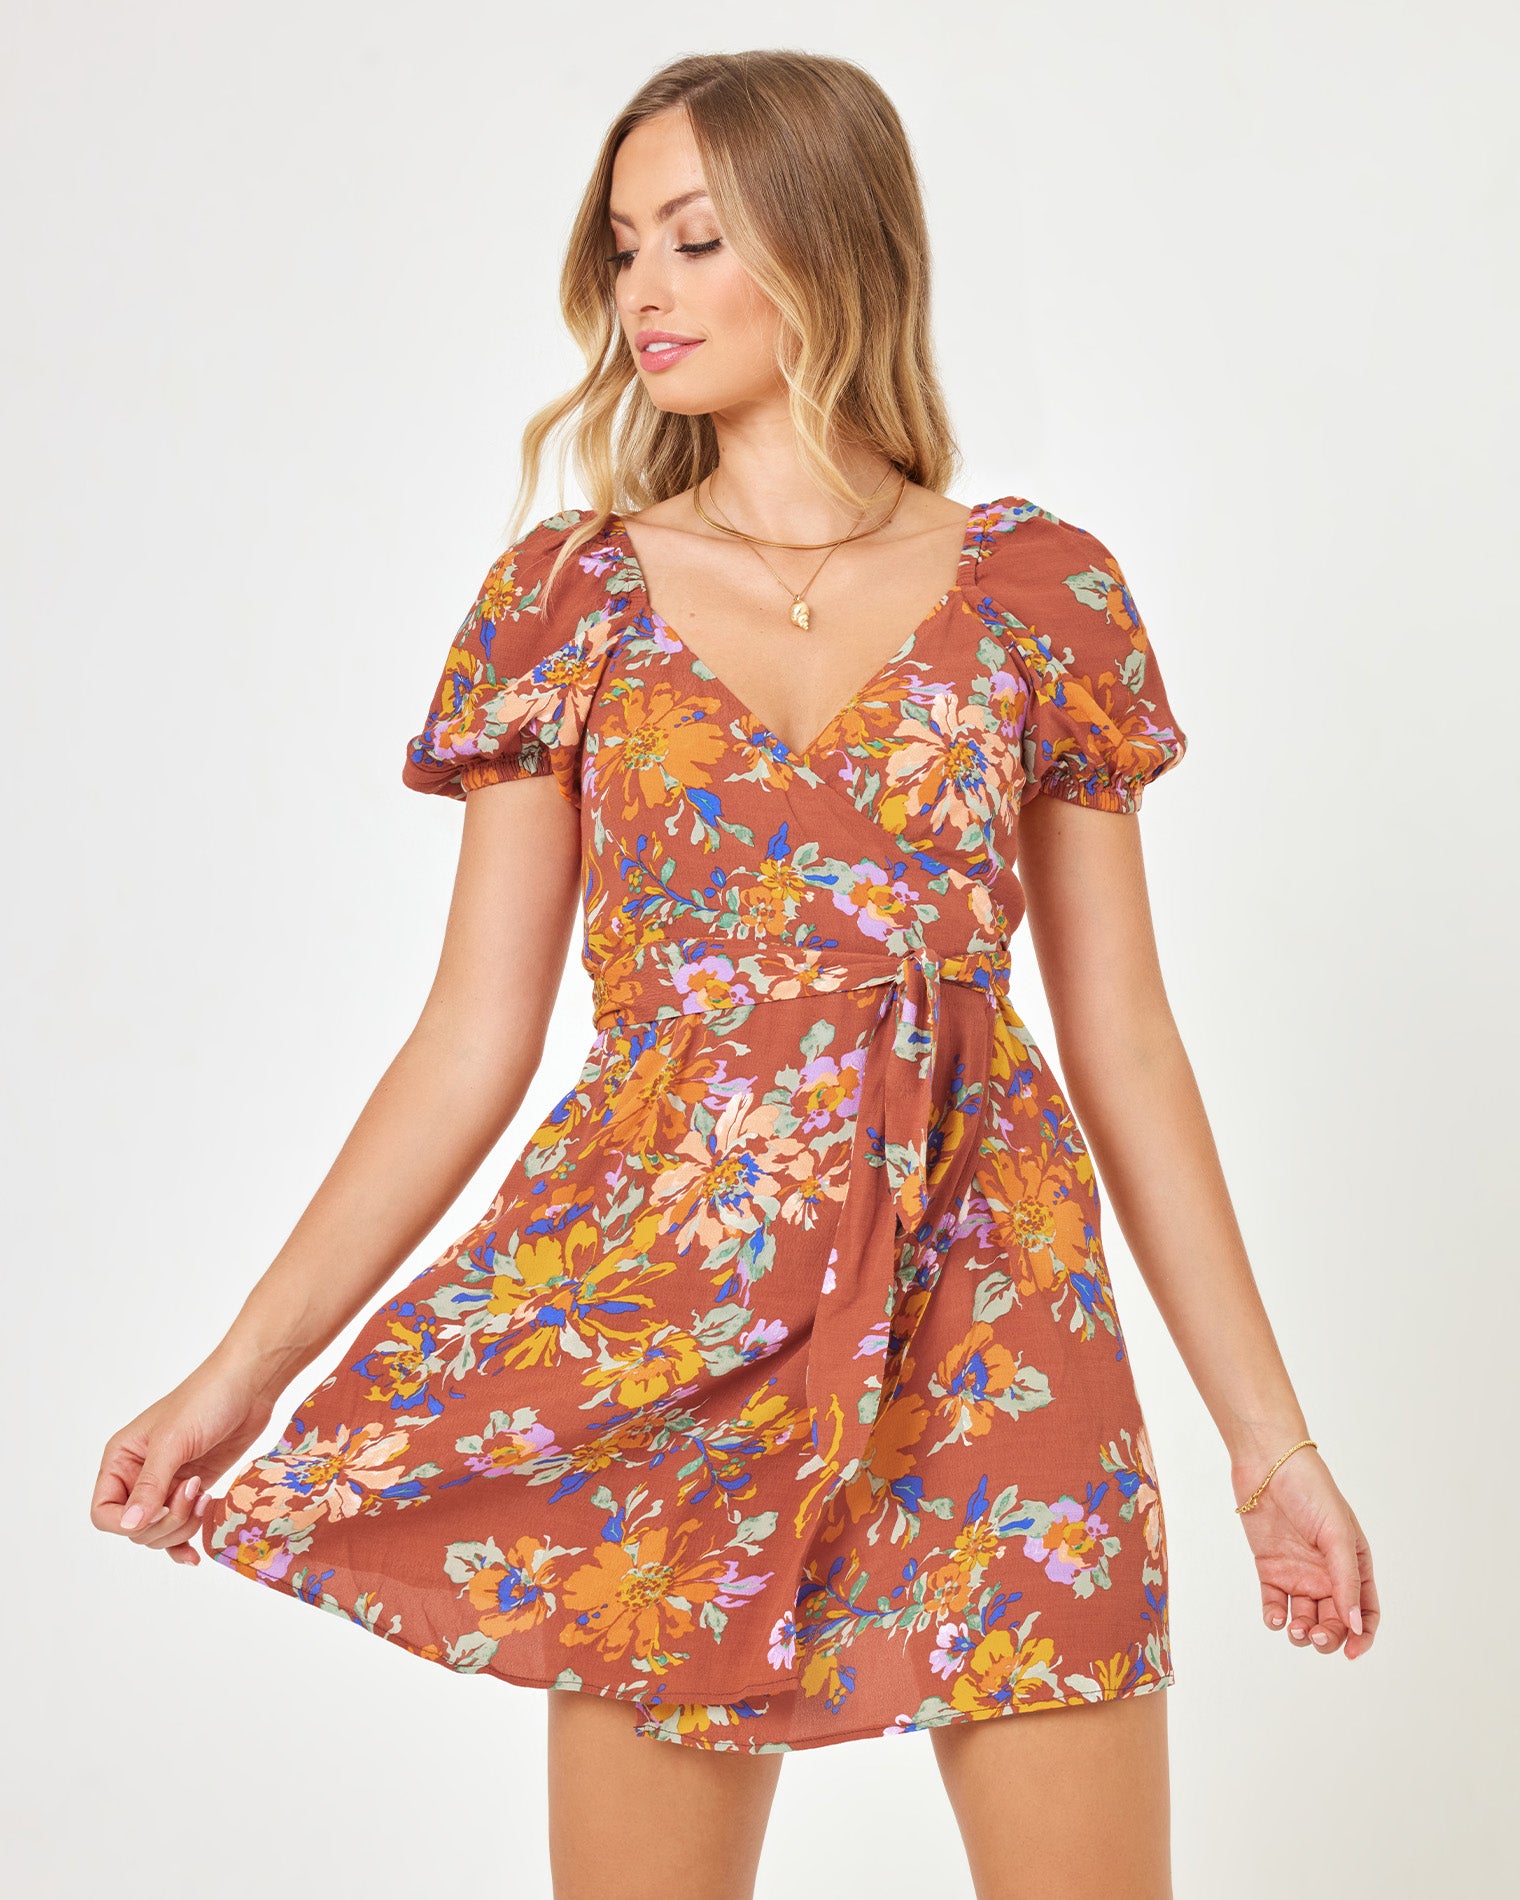 Cambria Dress - First Bloom First Bloom | Model: Taylor (size: S)